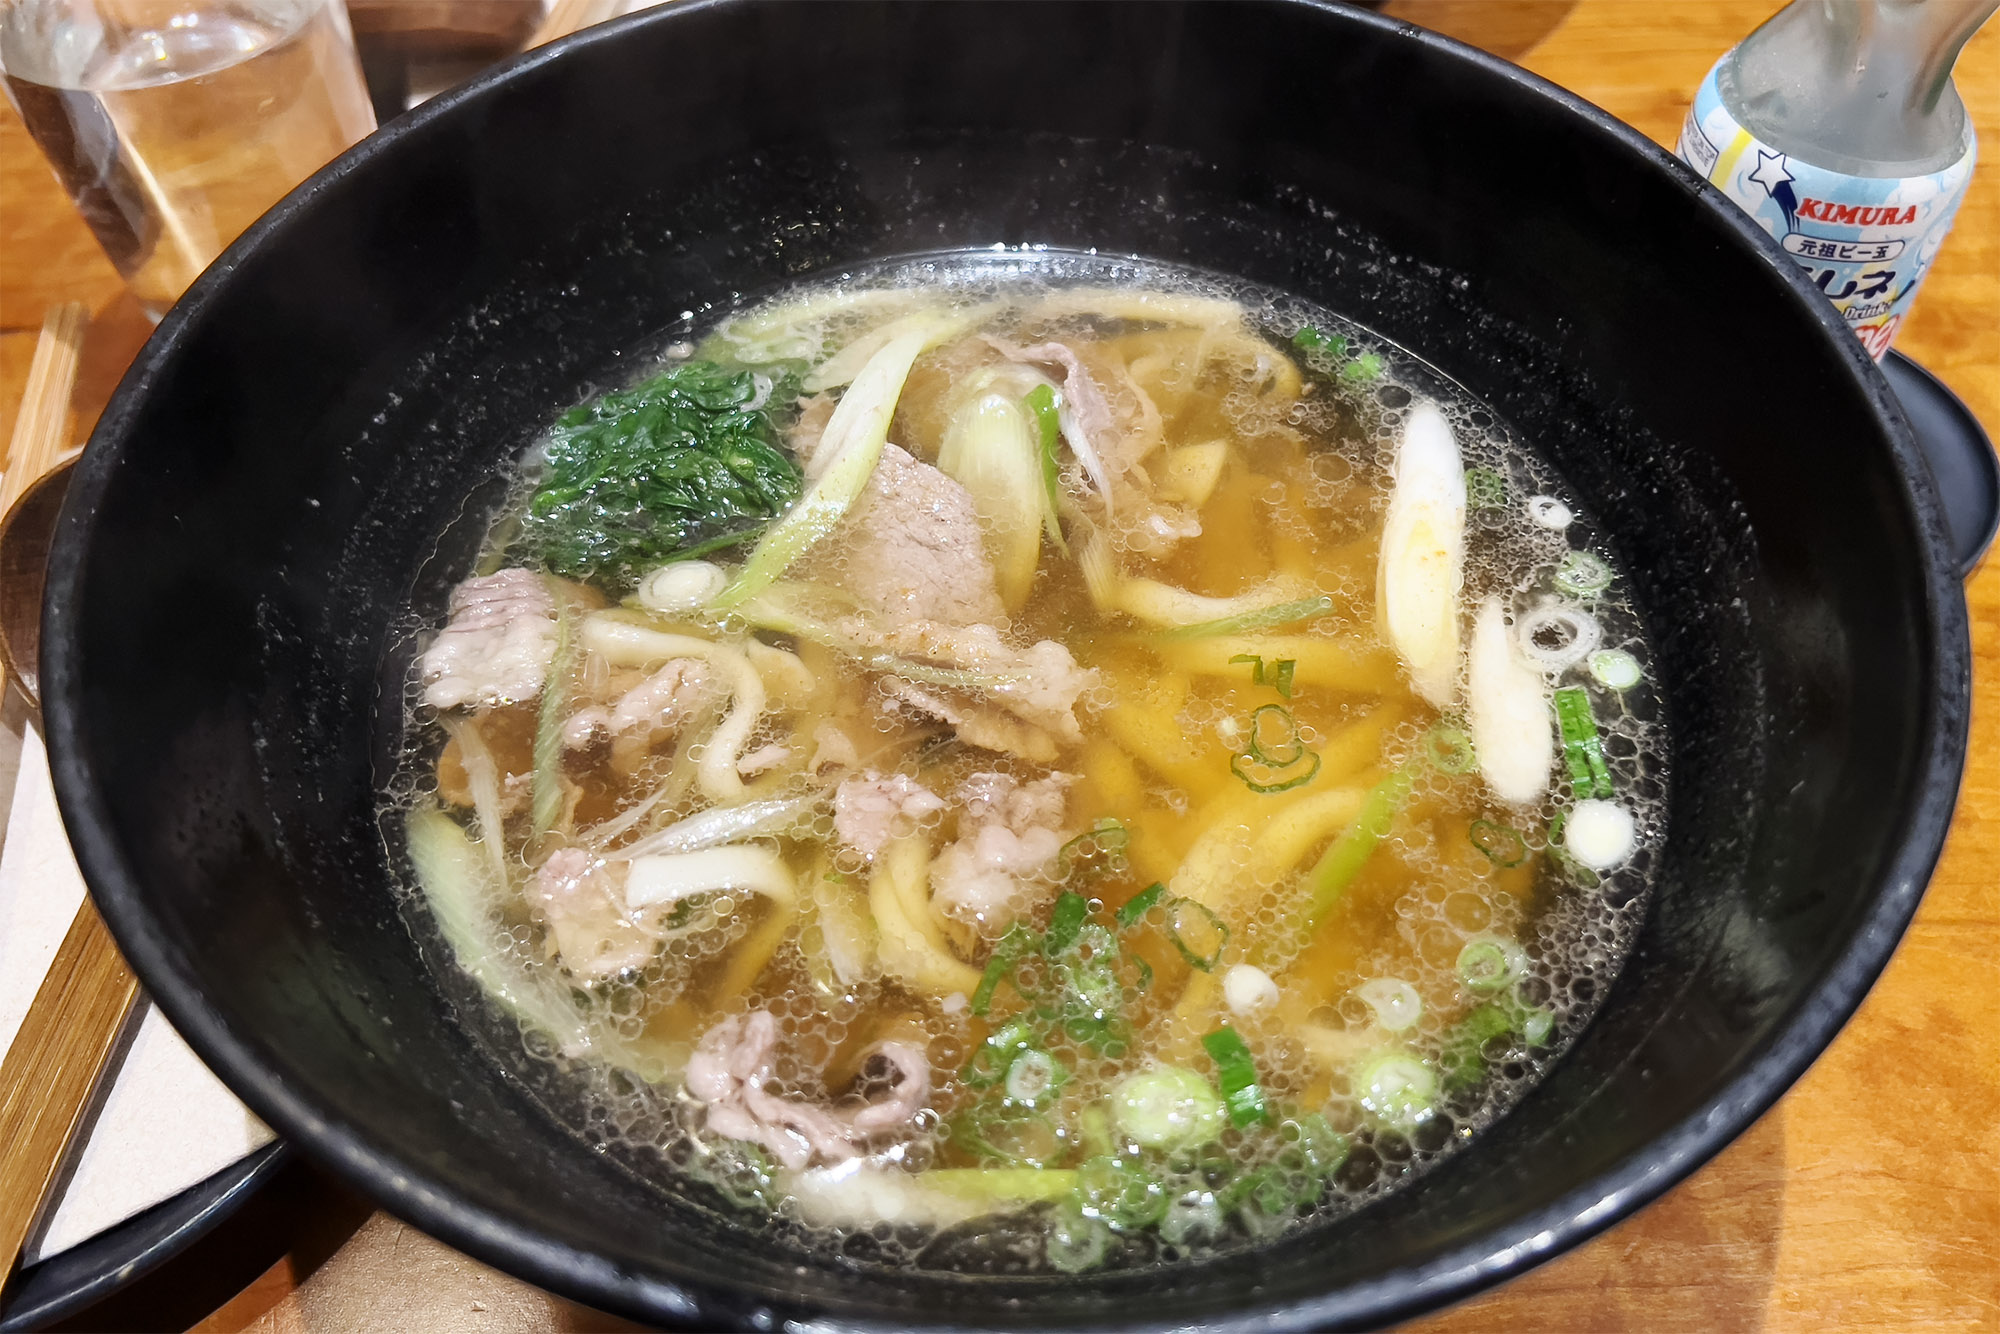 NYC: Raku - the place to go for udon